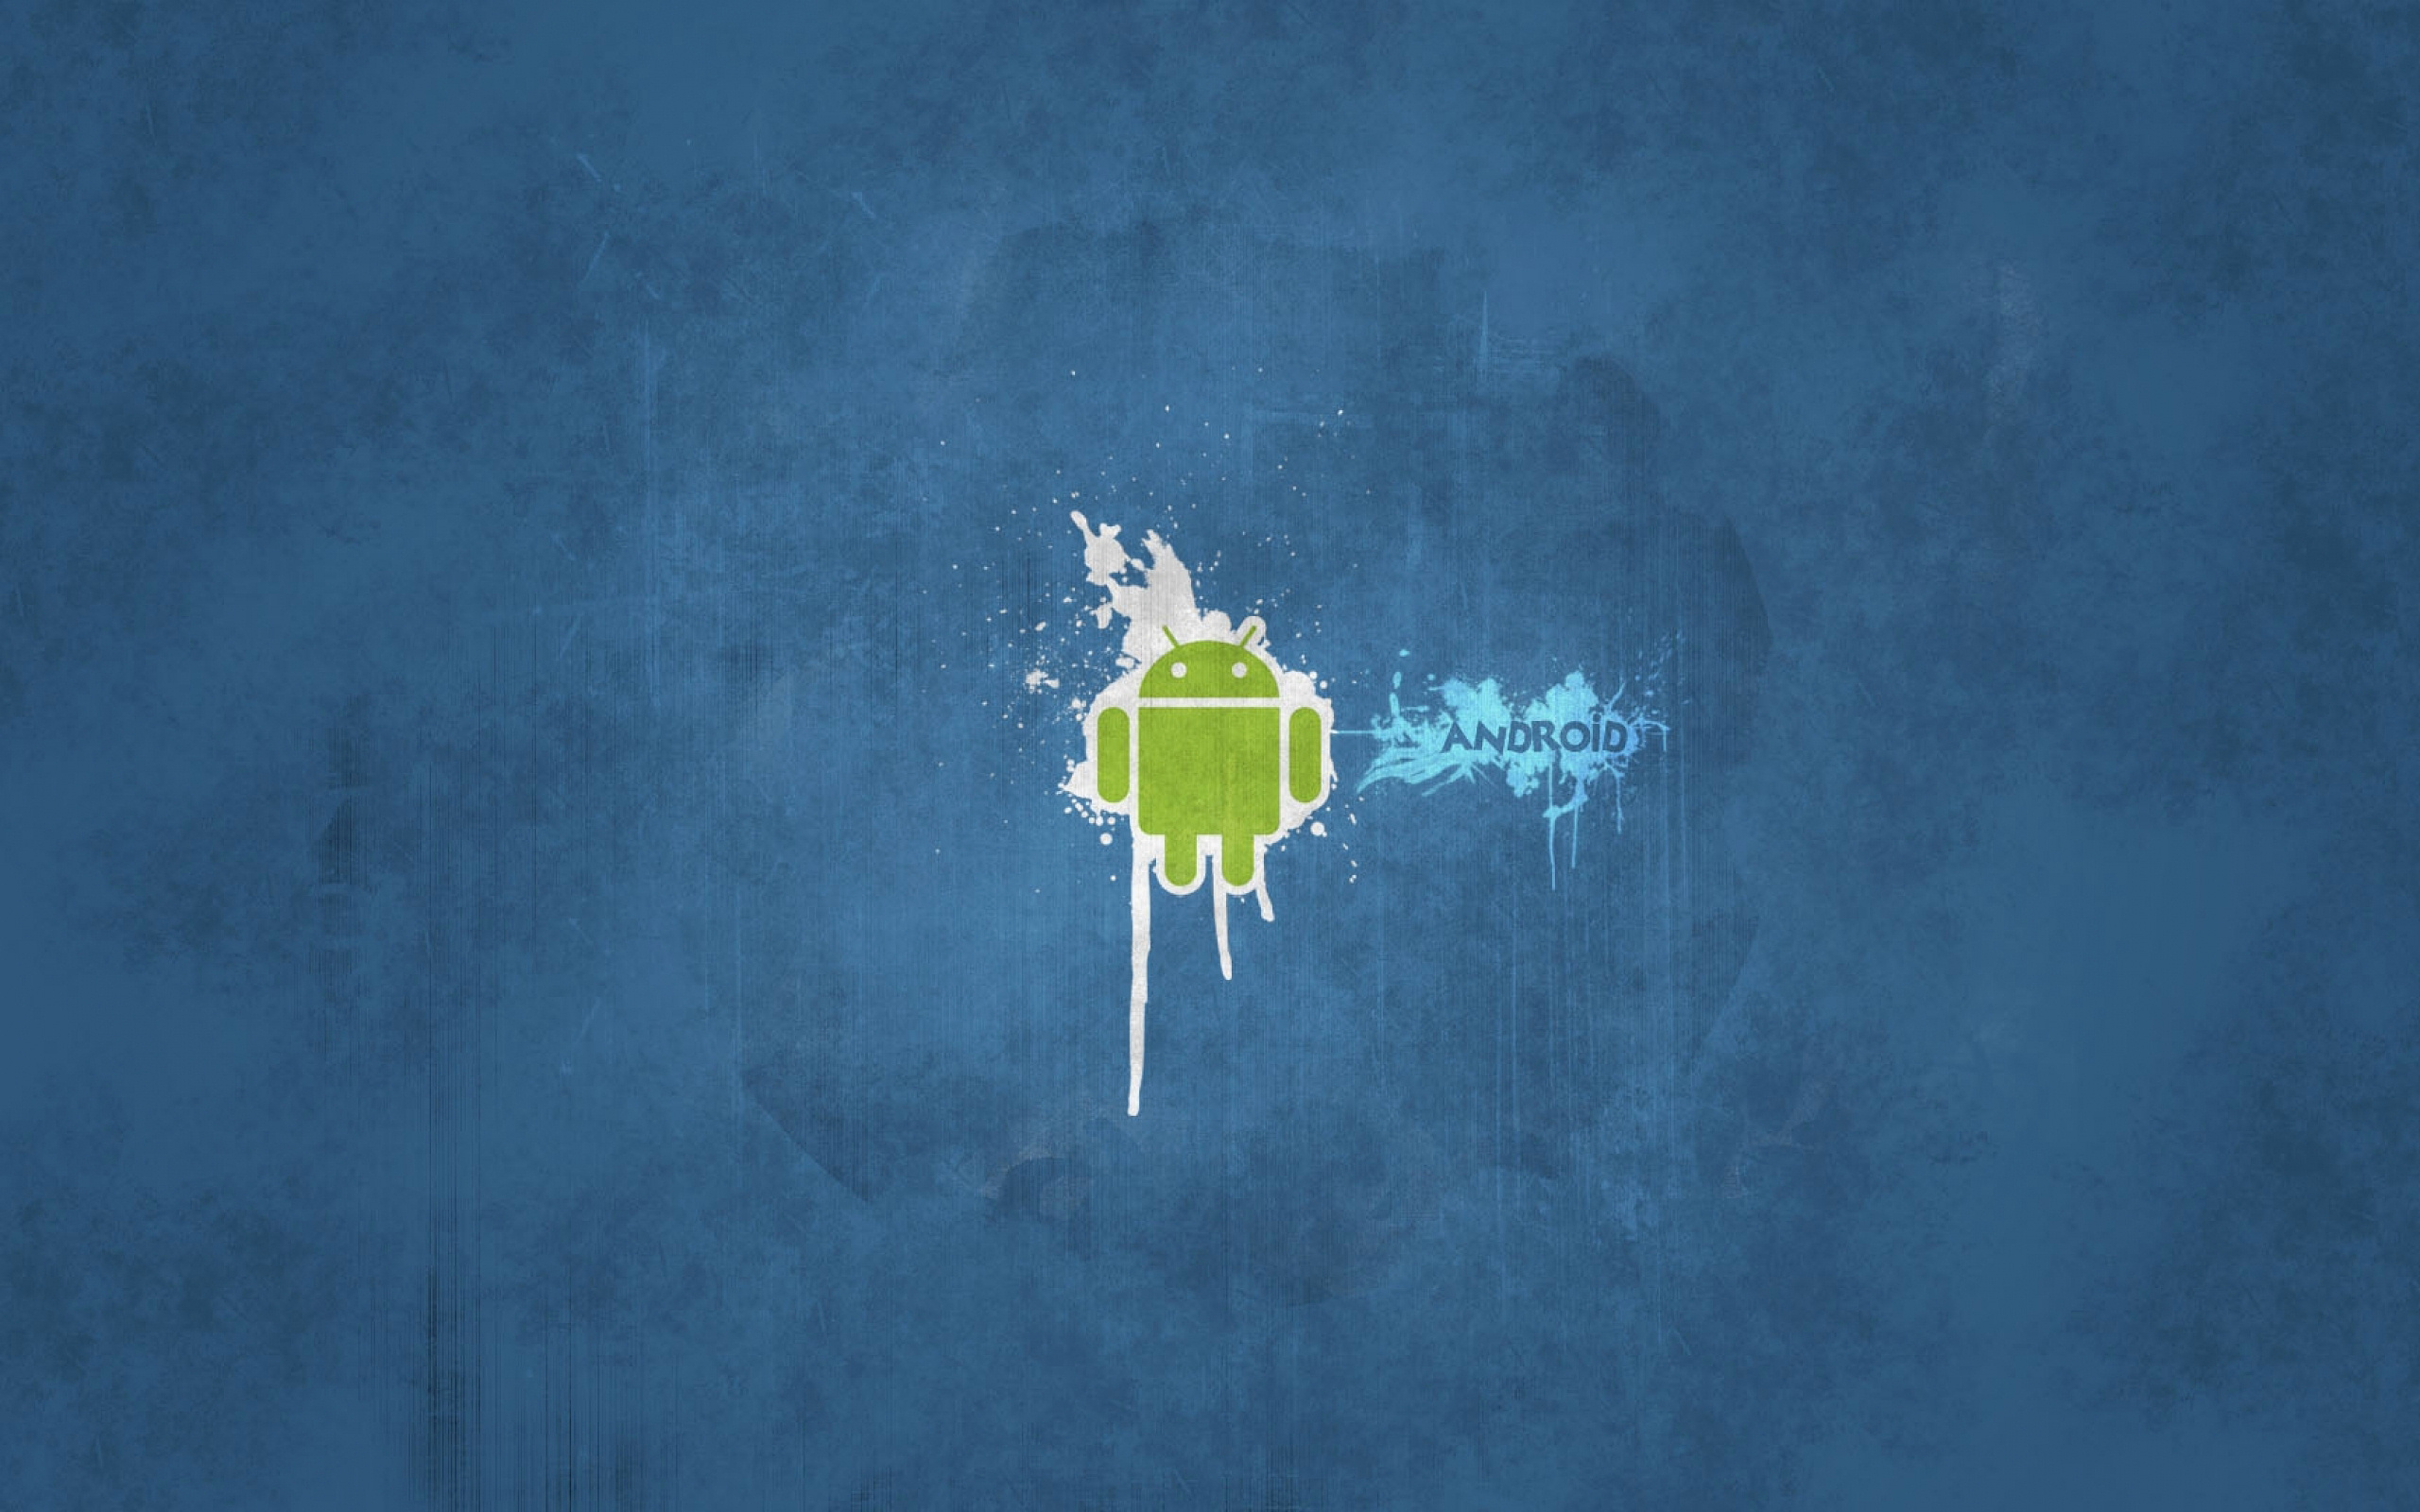 Android Blue Wallpaers HD wallpapers   Android Blue Wallpaers 2560x1600